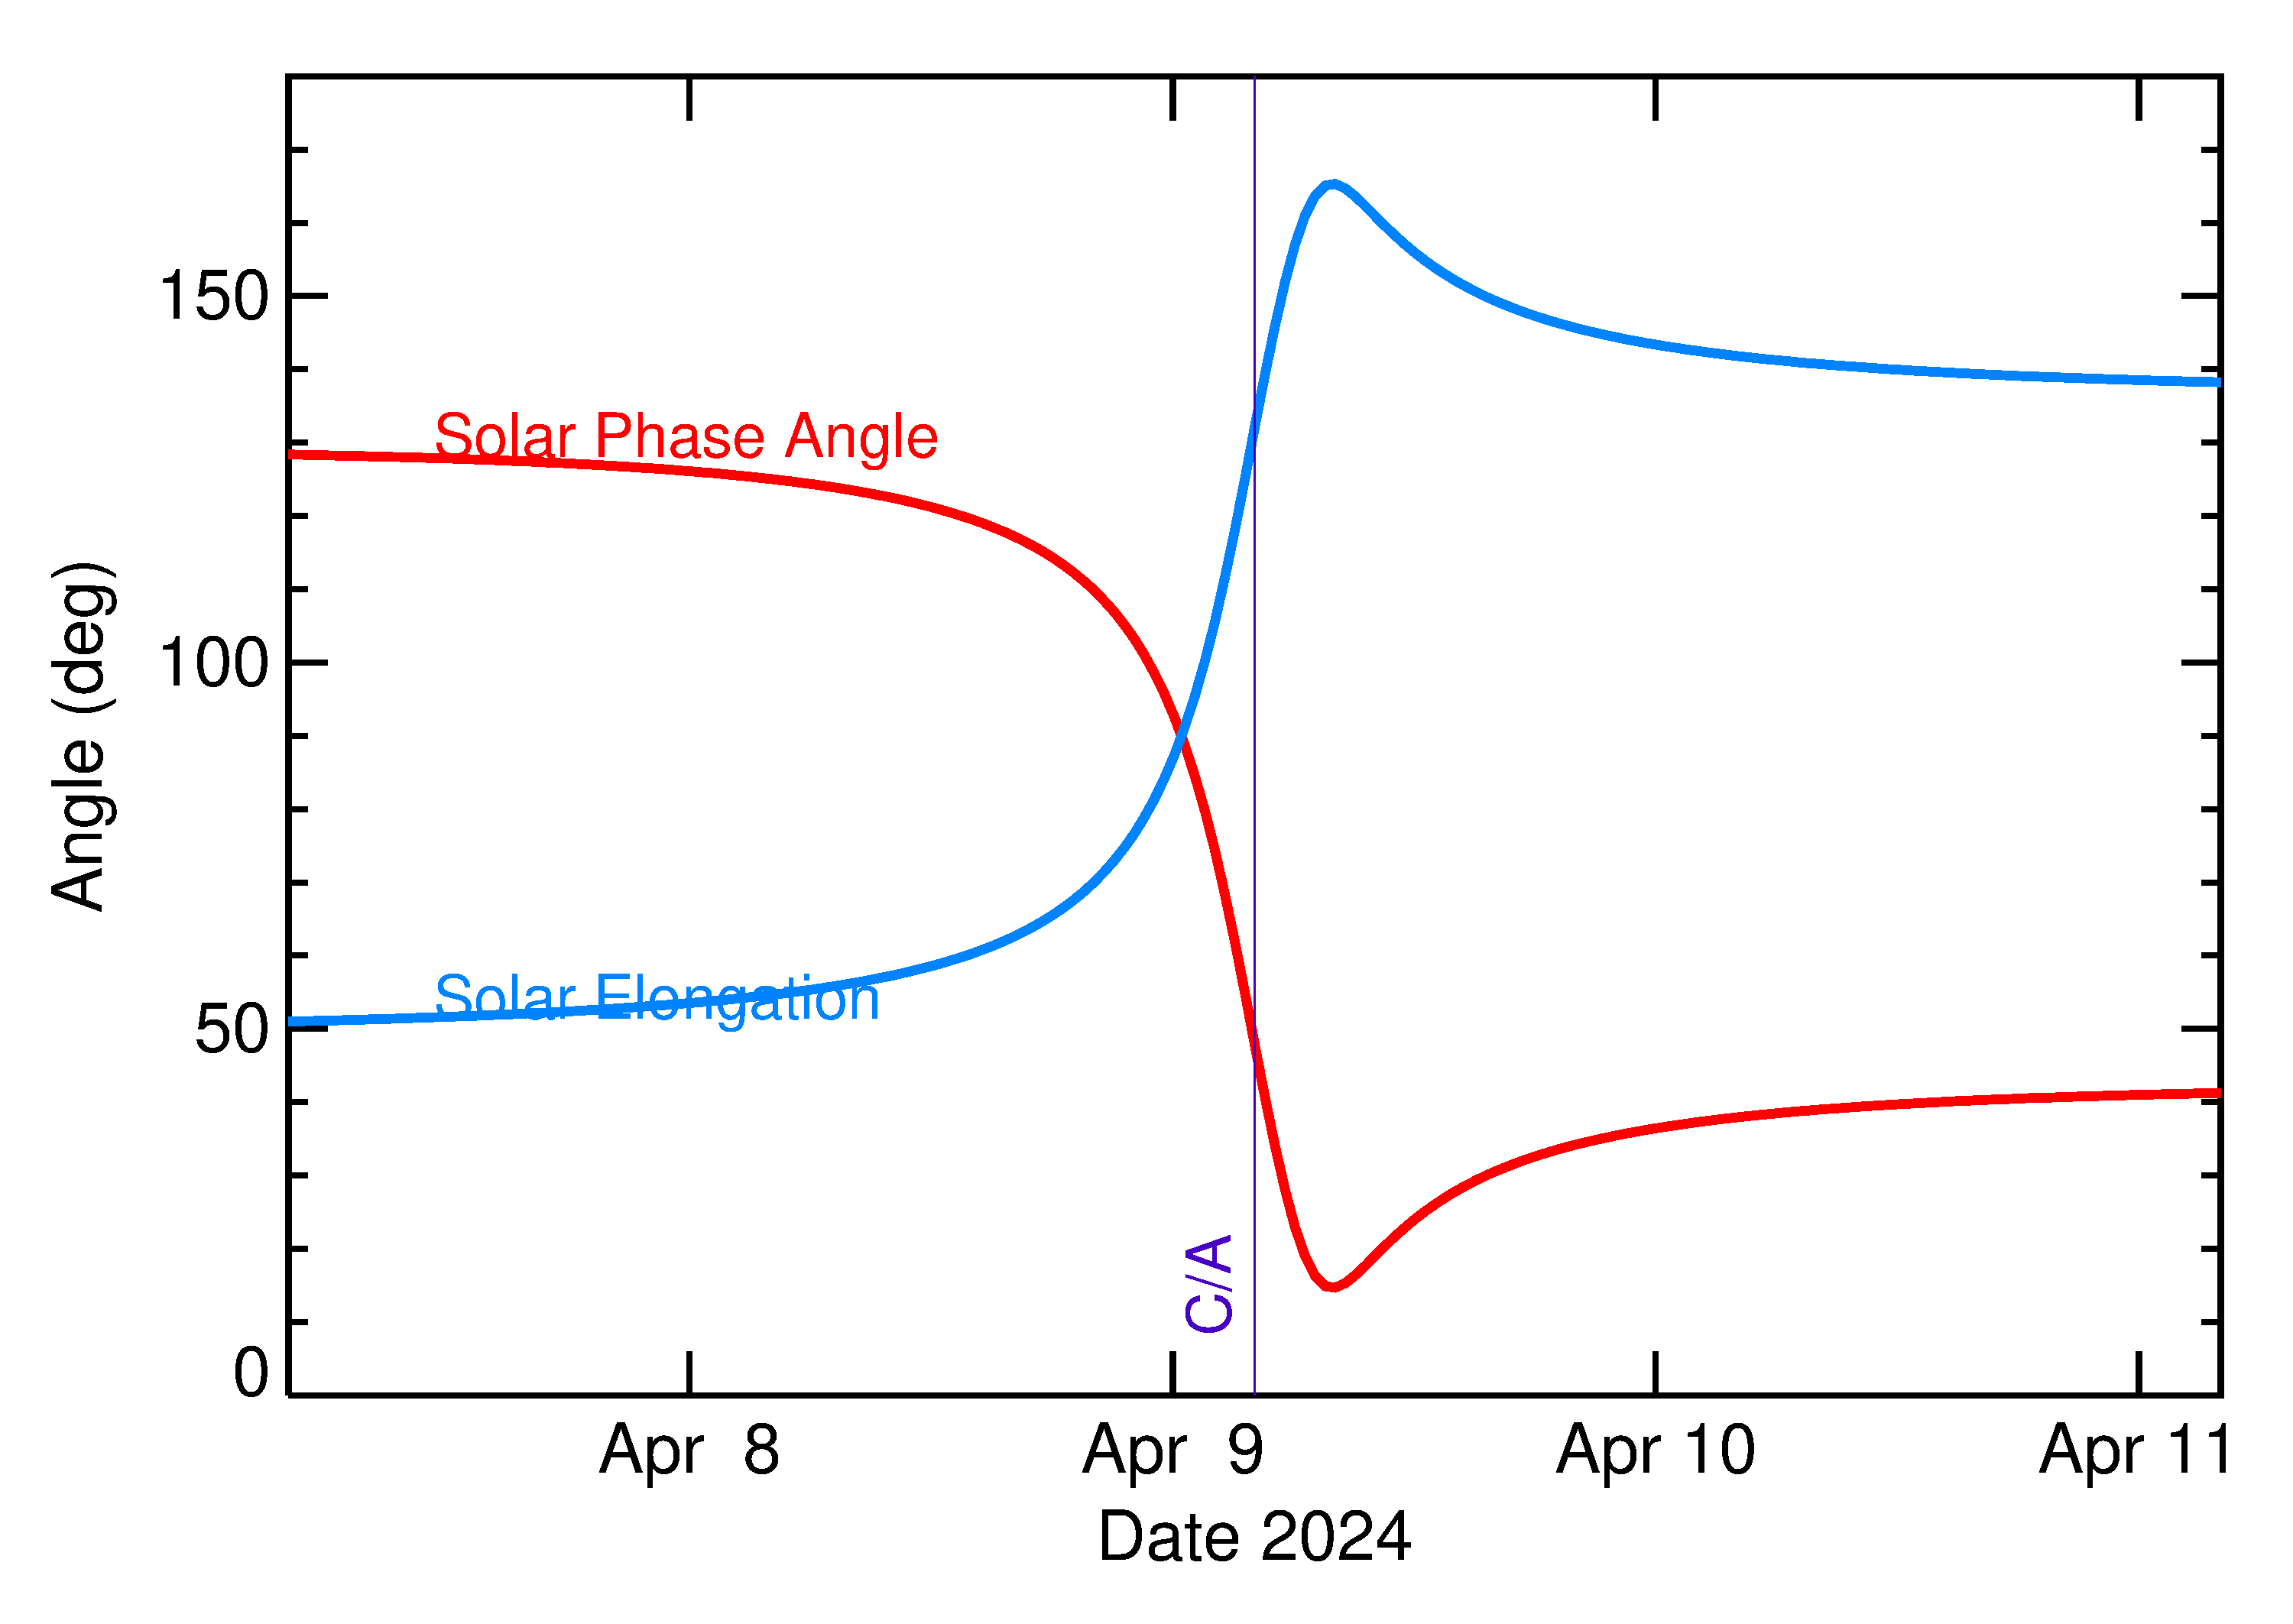 Solar Elongation and Solar Phase Angle of 2024 GW4 in the days around closest approach